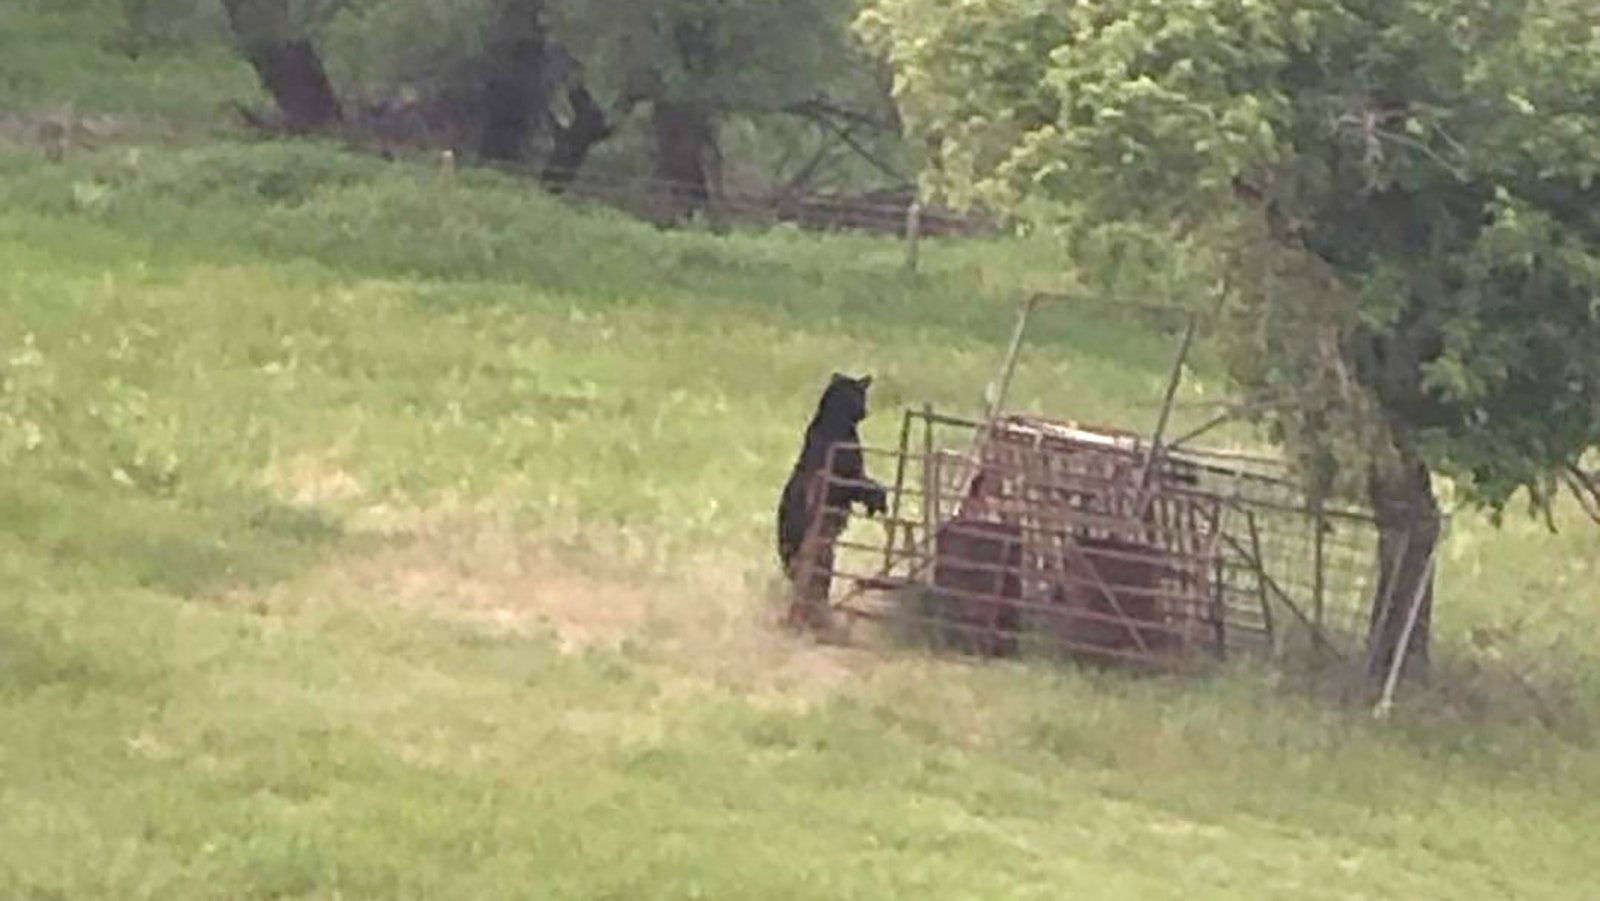 This young black bear was recently spotted on the west side of Sundance. Bears used to be sparse in northeast Wyoming. They’ve been moving in from other parts of the Cowboy State, as well as from Montana.